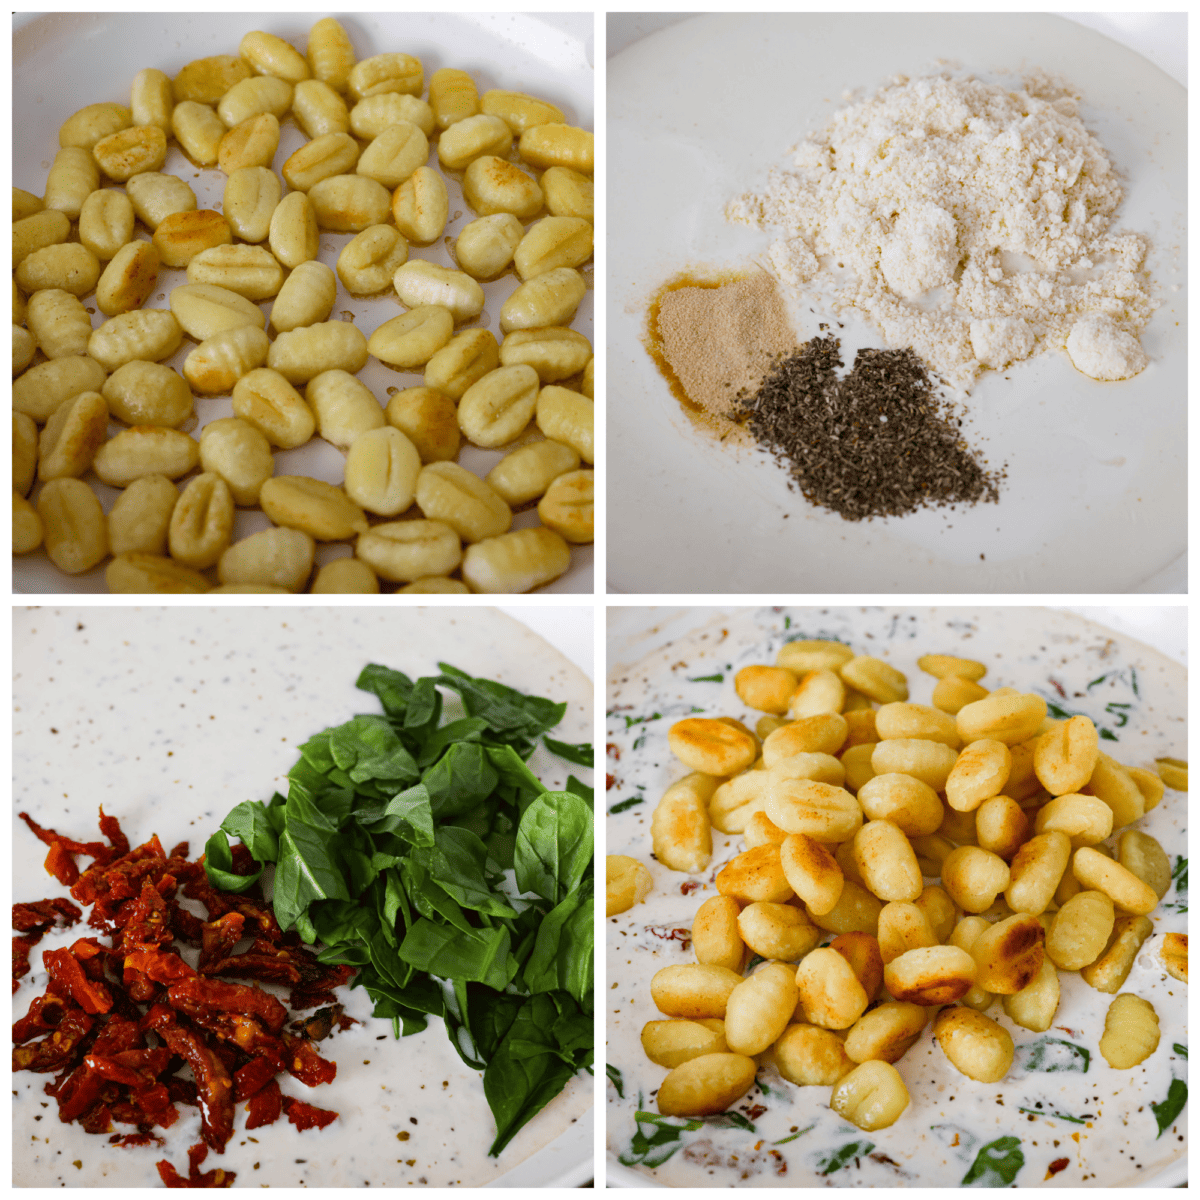 4-photo collage of the gnocchi being cooked, and the sauce ingredients being mixed together.